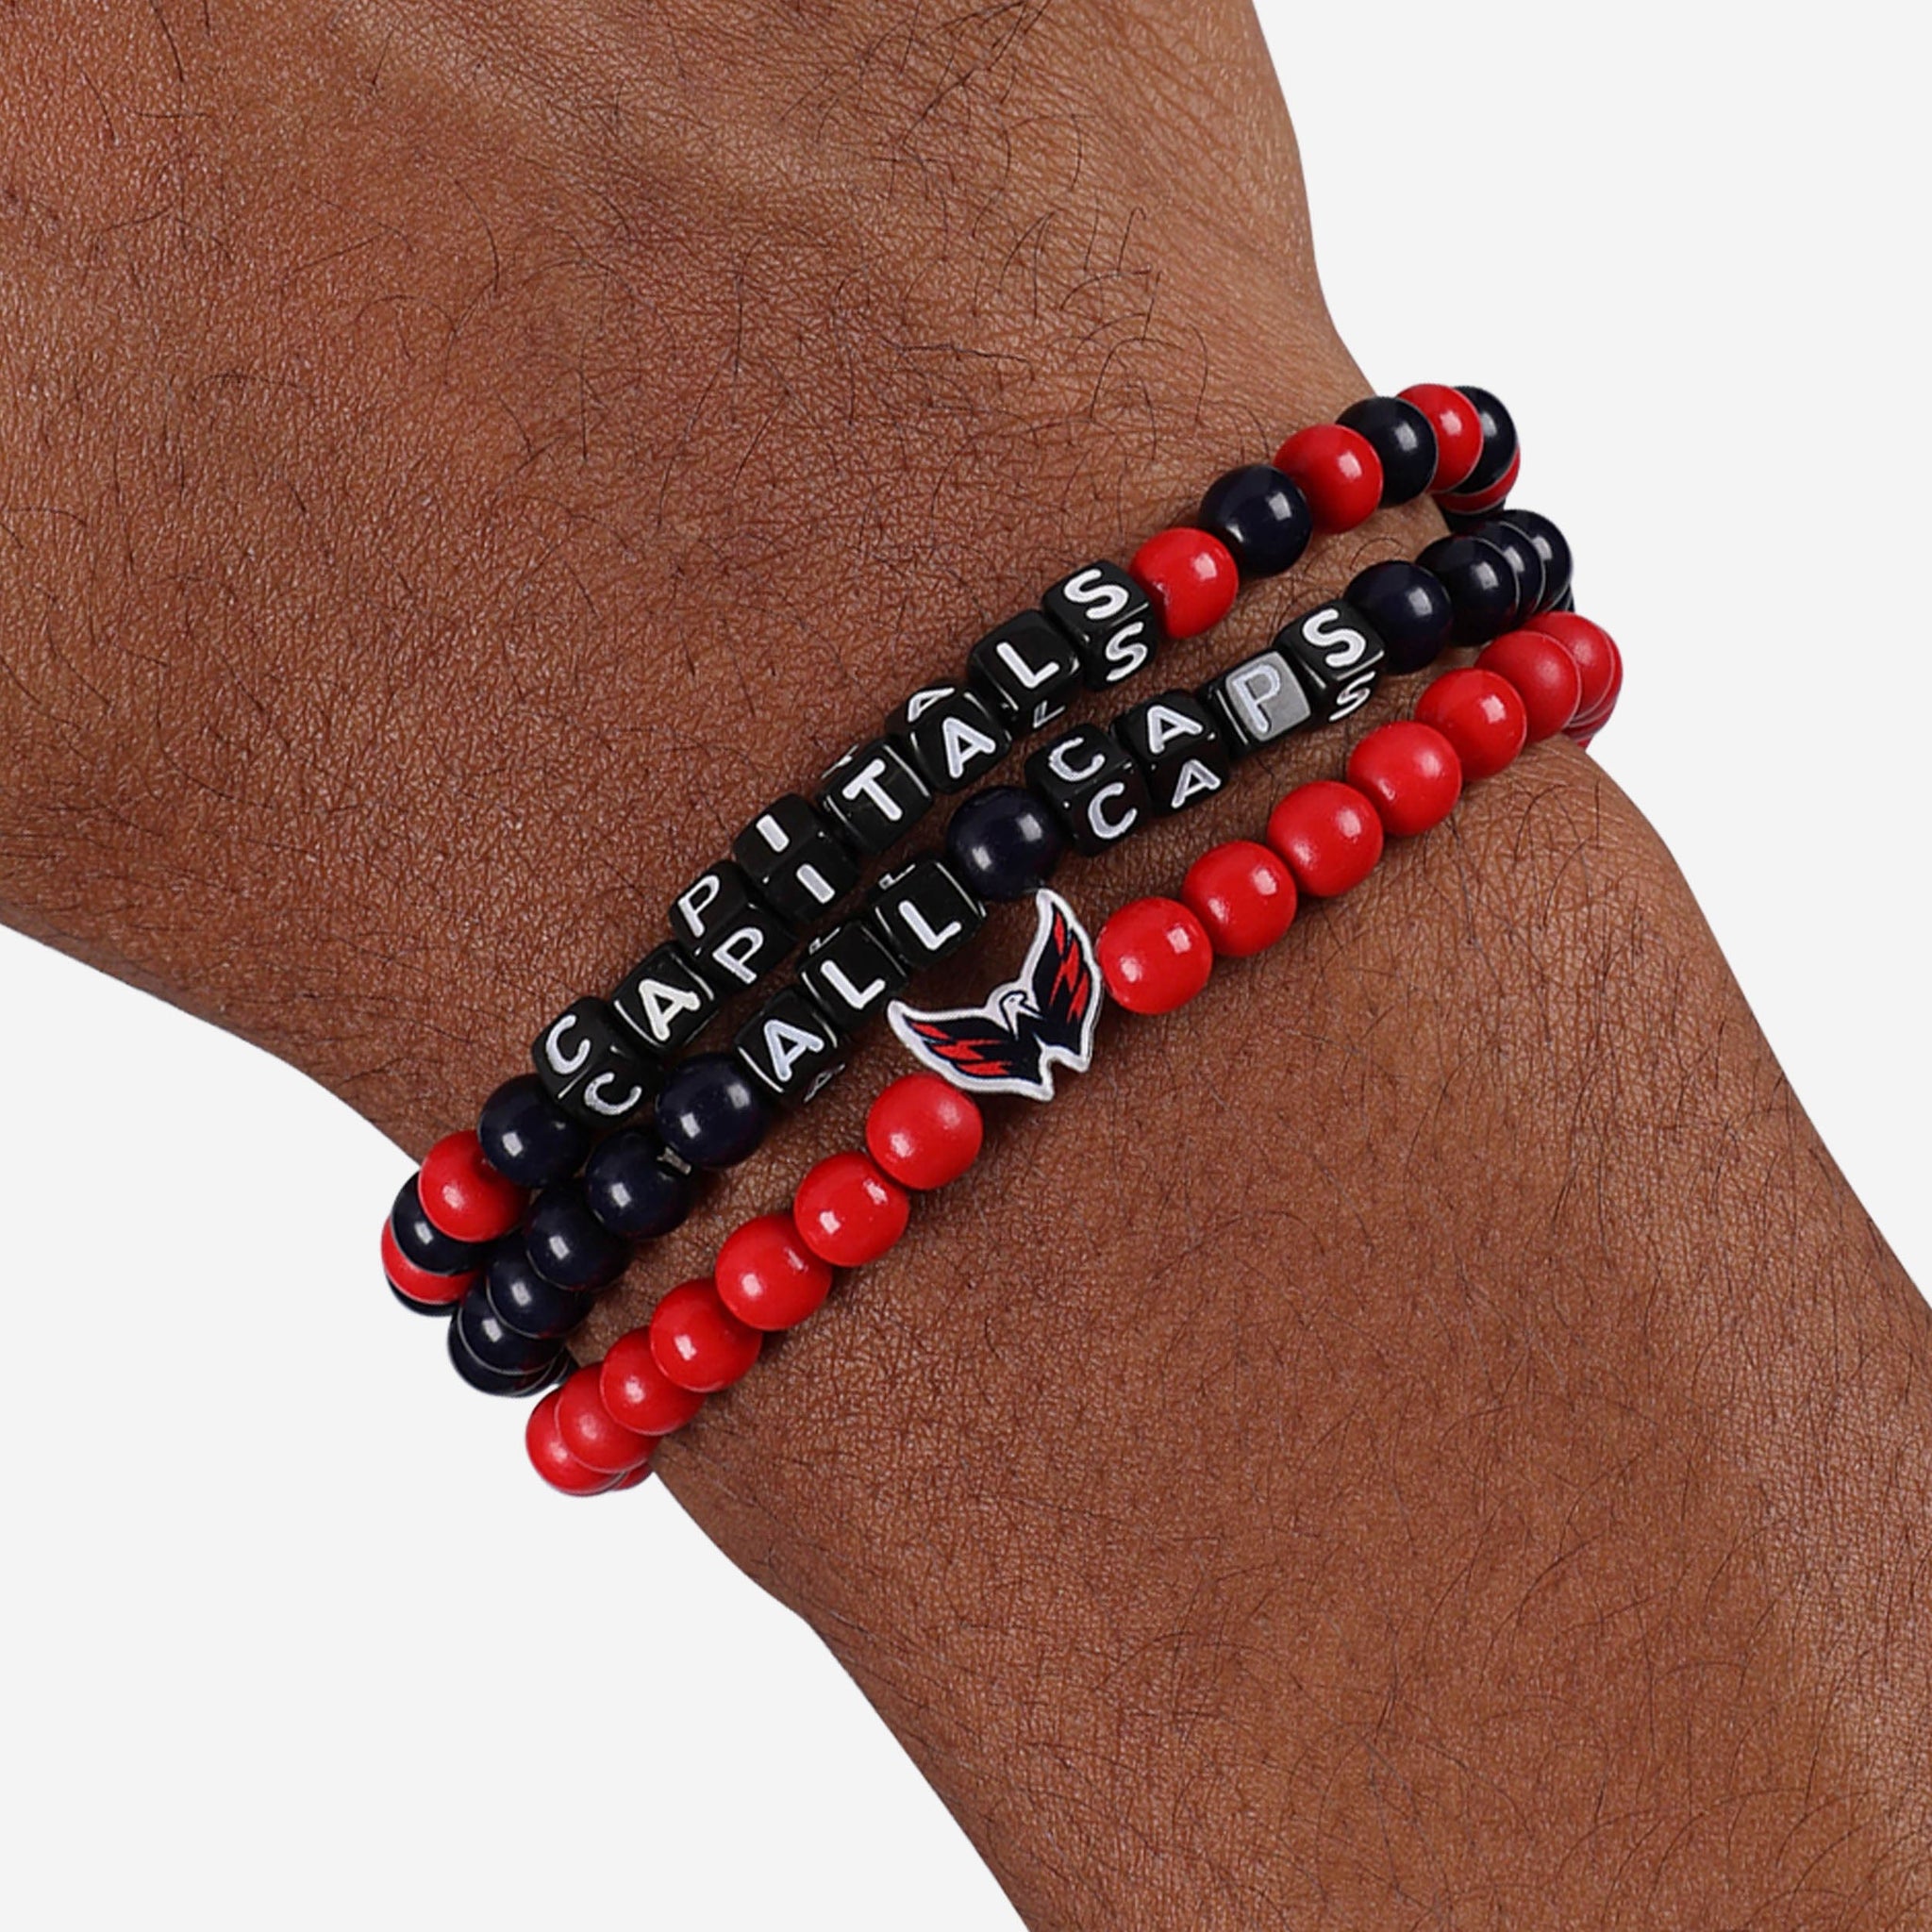 20 Pieces Baseball Bracelet Red Black Brown White Wristbands